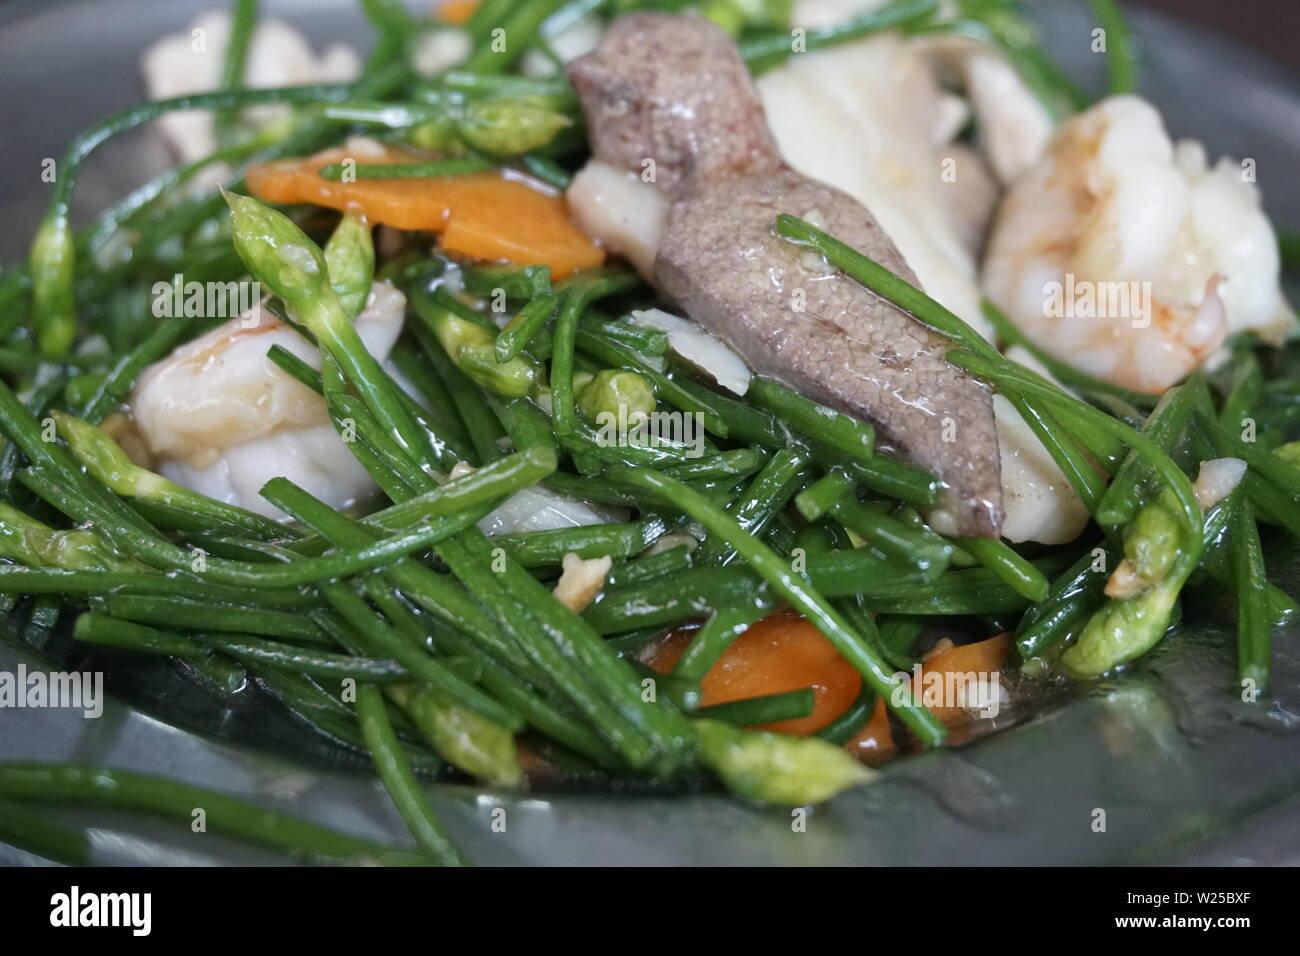 stir fried chives, Chinese cooking Stock Photo